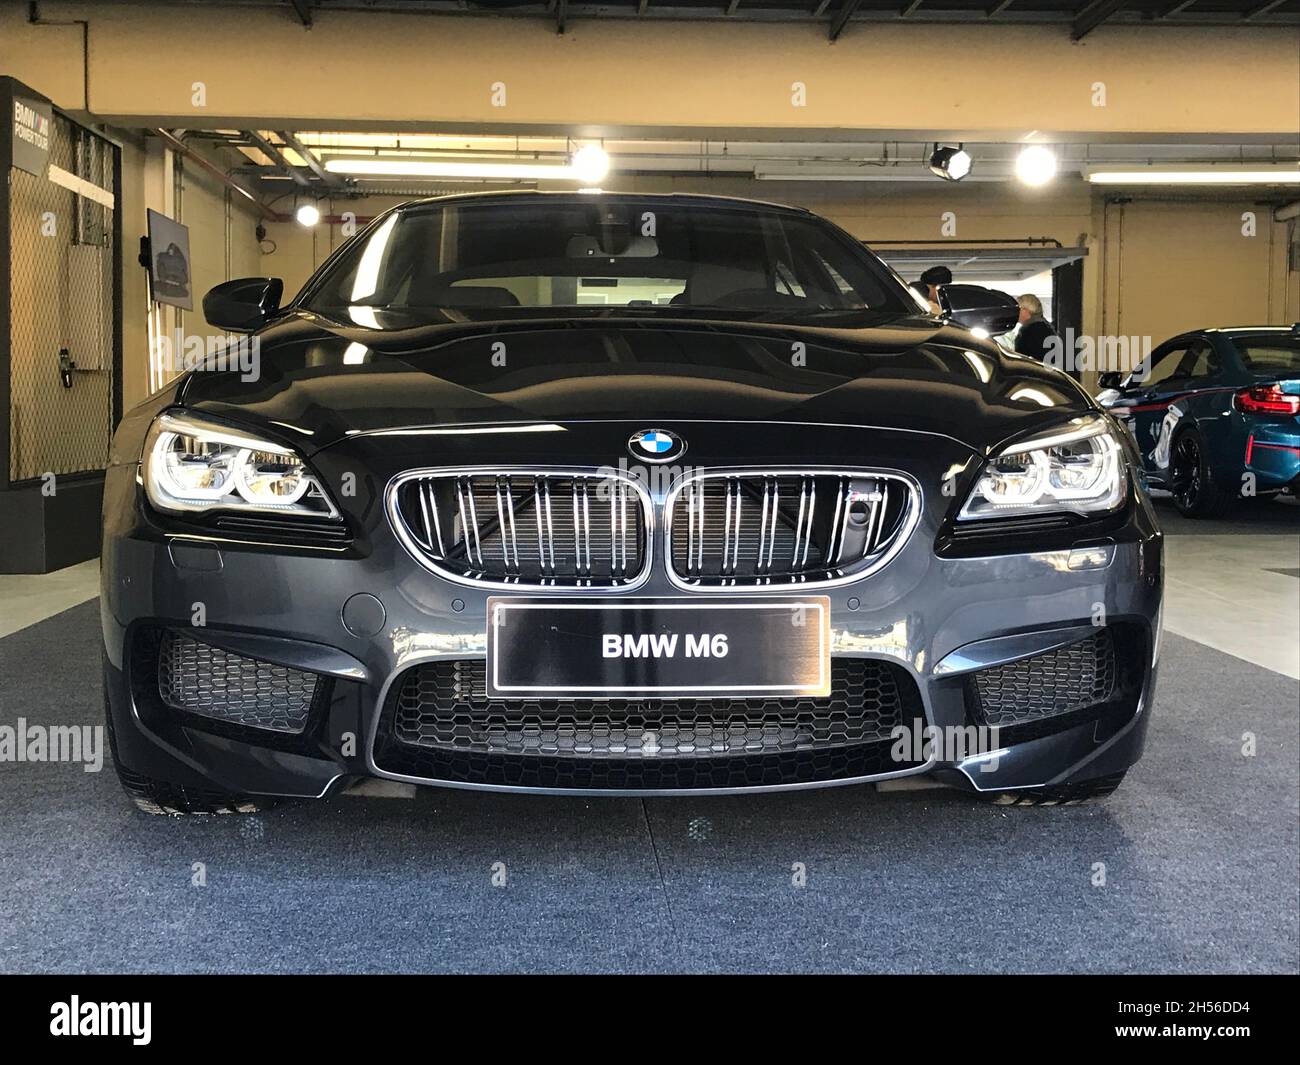 BMW M6 (F13) : front close-up, black, year 2017, 3rd generation. Produced  from 2012 to 2018, at Interlagos Autodrome - José Carlos Pace - São Paulo  Stock Photo - Alamy